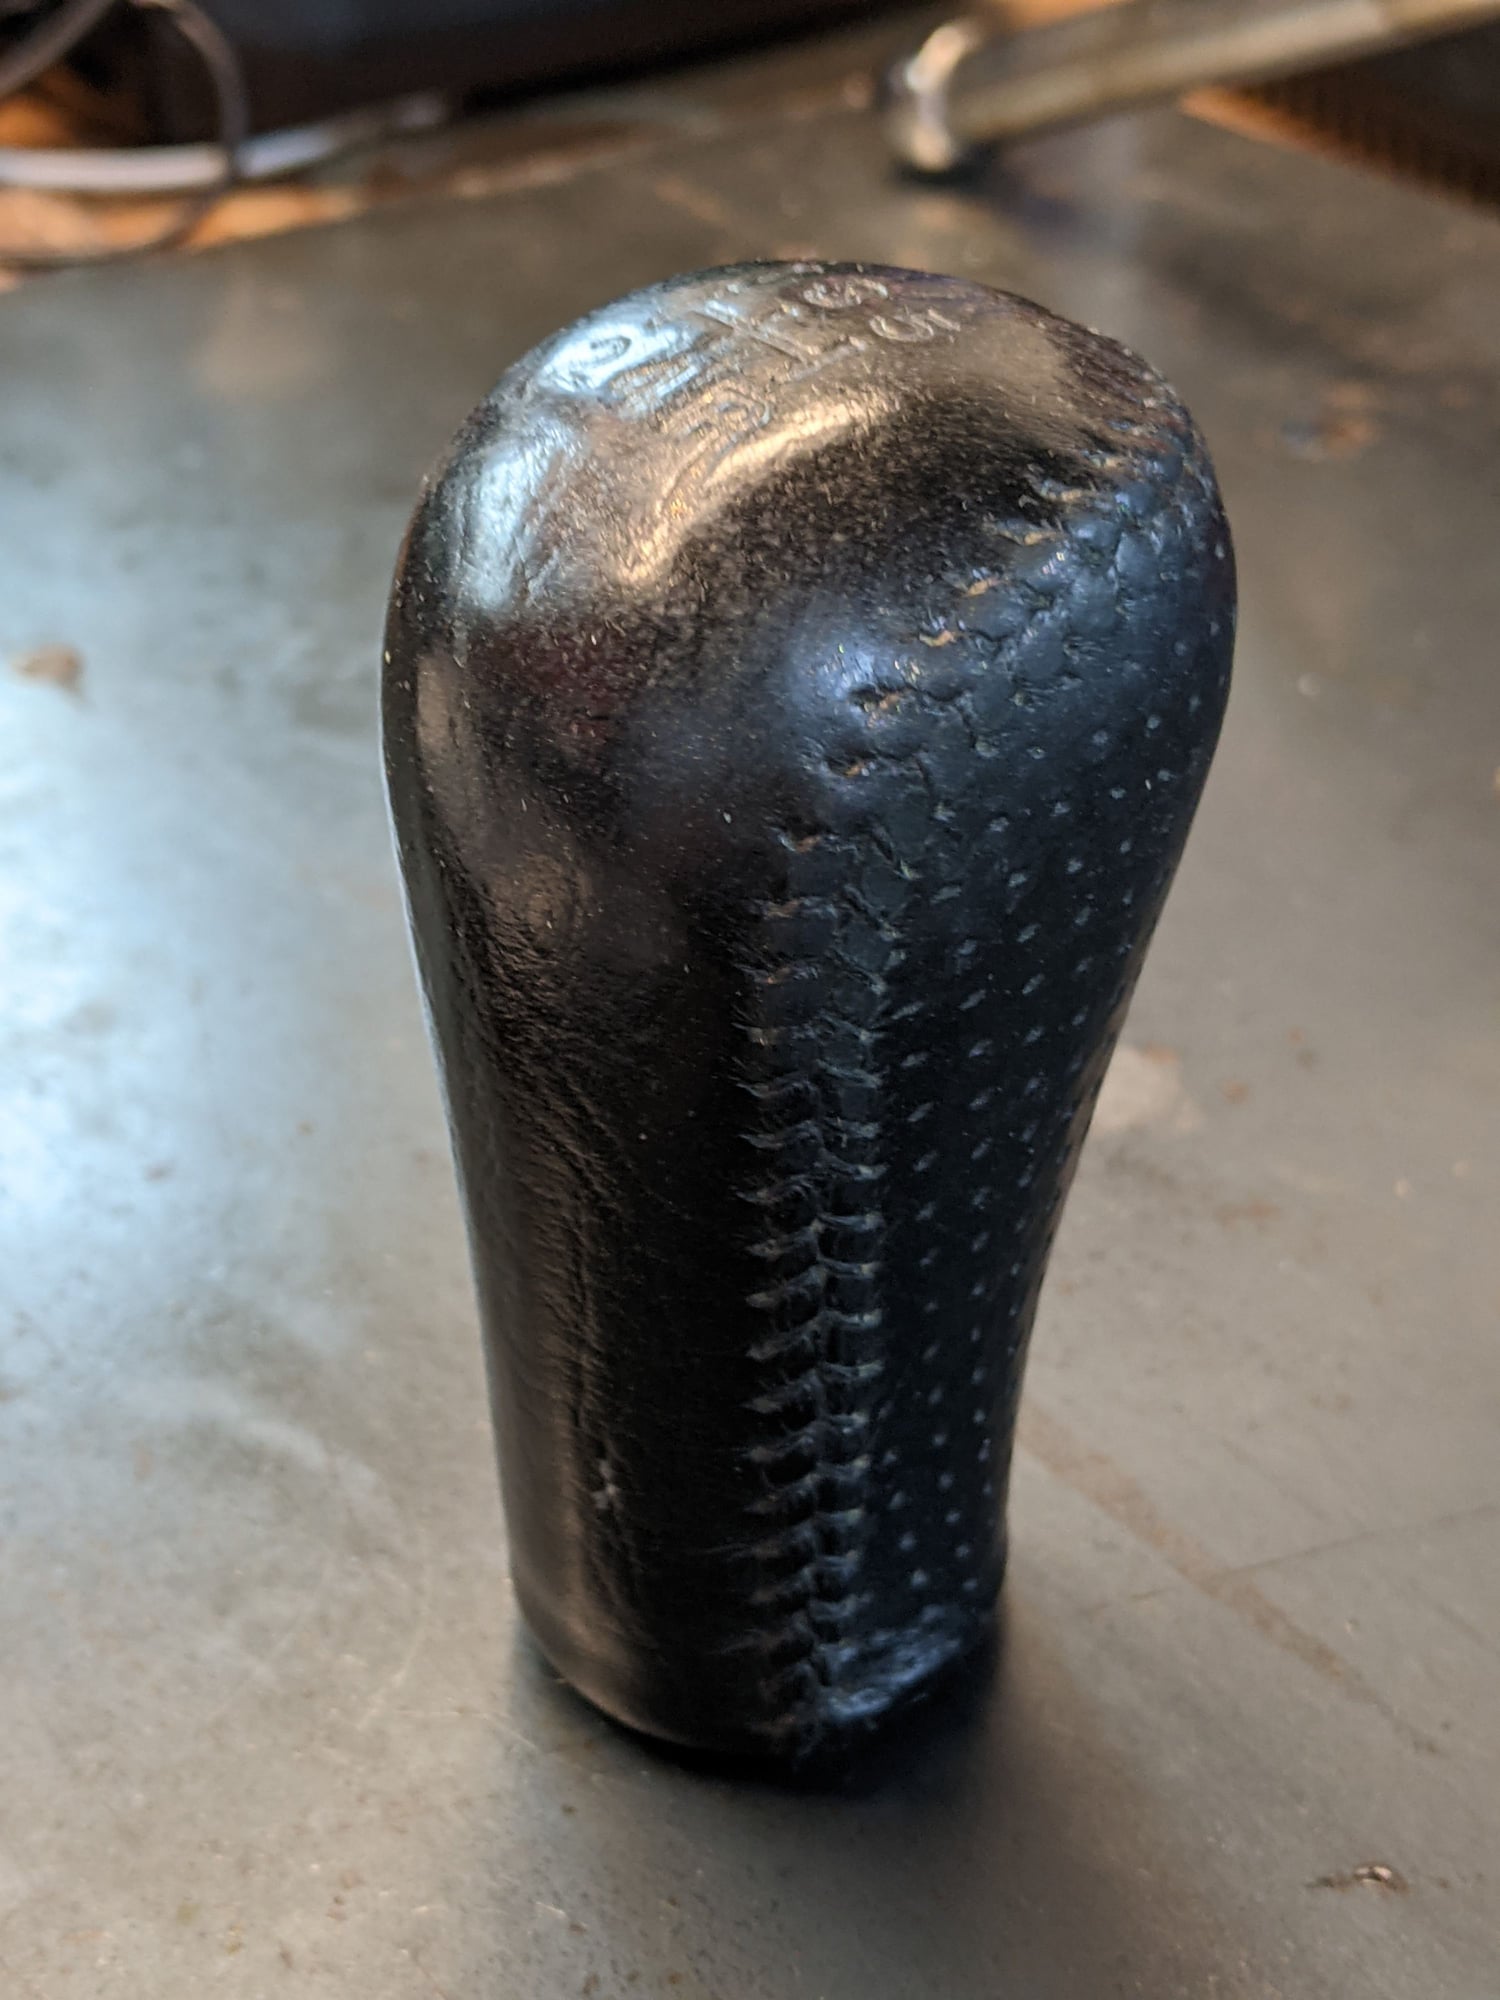 Interior/Upholstery - OEM Shift knobs (used) and Sakebomb Stainless clutch line (new) - Used - 1993 to 2002 Mazda RX-7 - Bay Area, CA 94080, United States